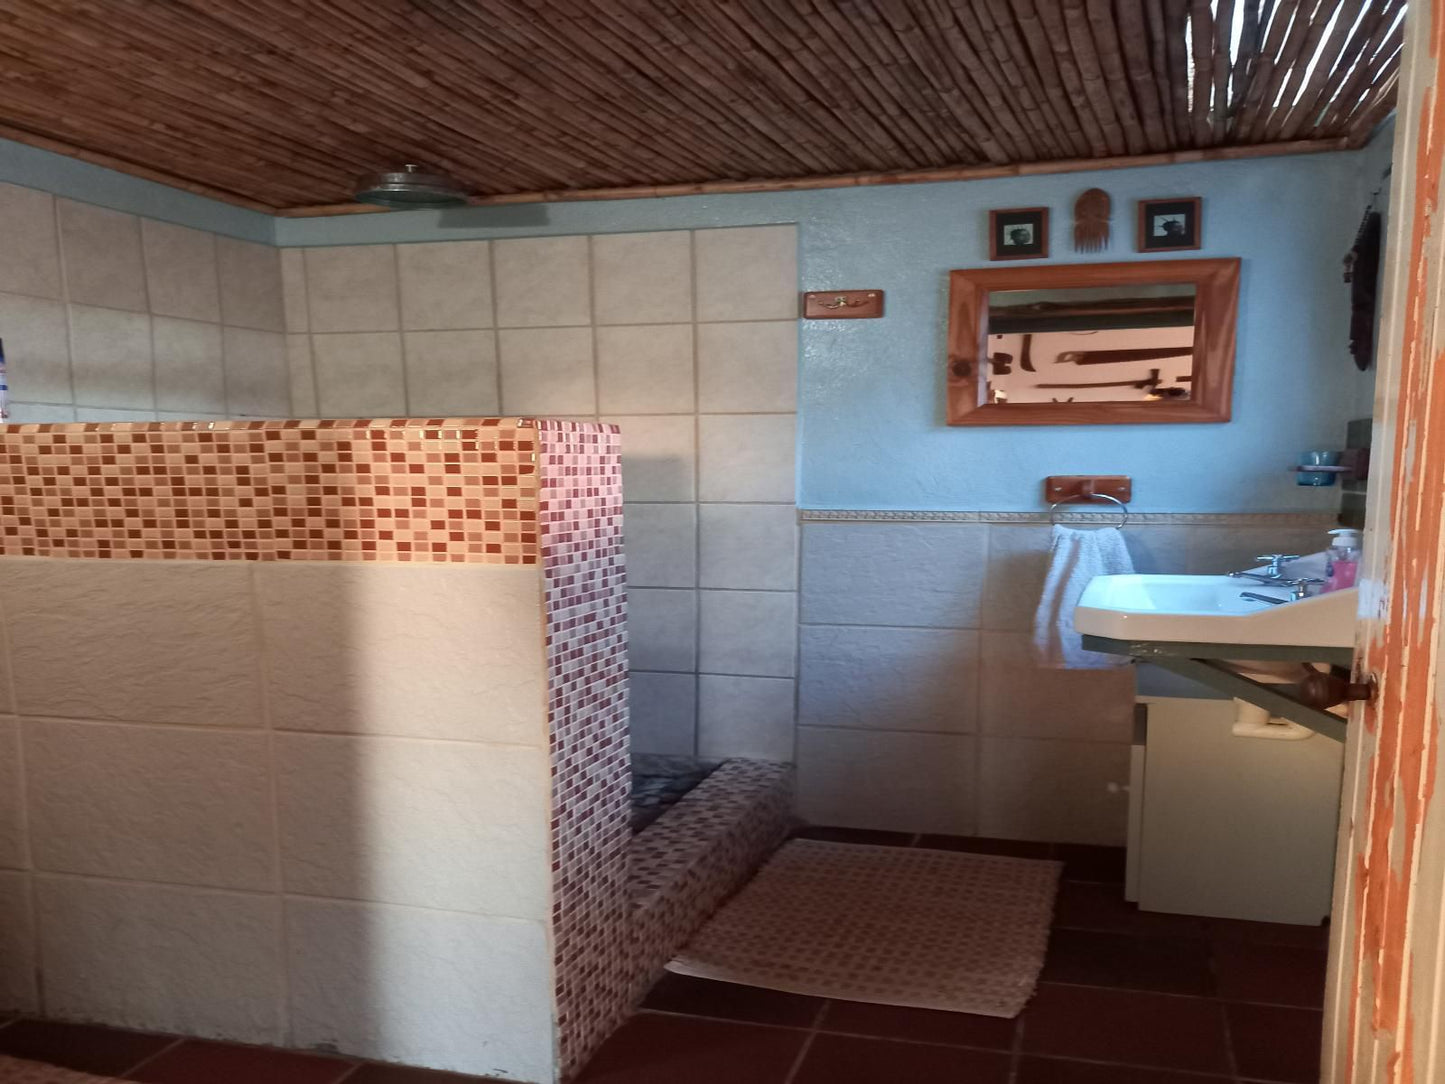 Wolverfontein Karoo Cottages Ladismith Western Cape South Africa Bathroom